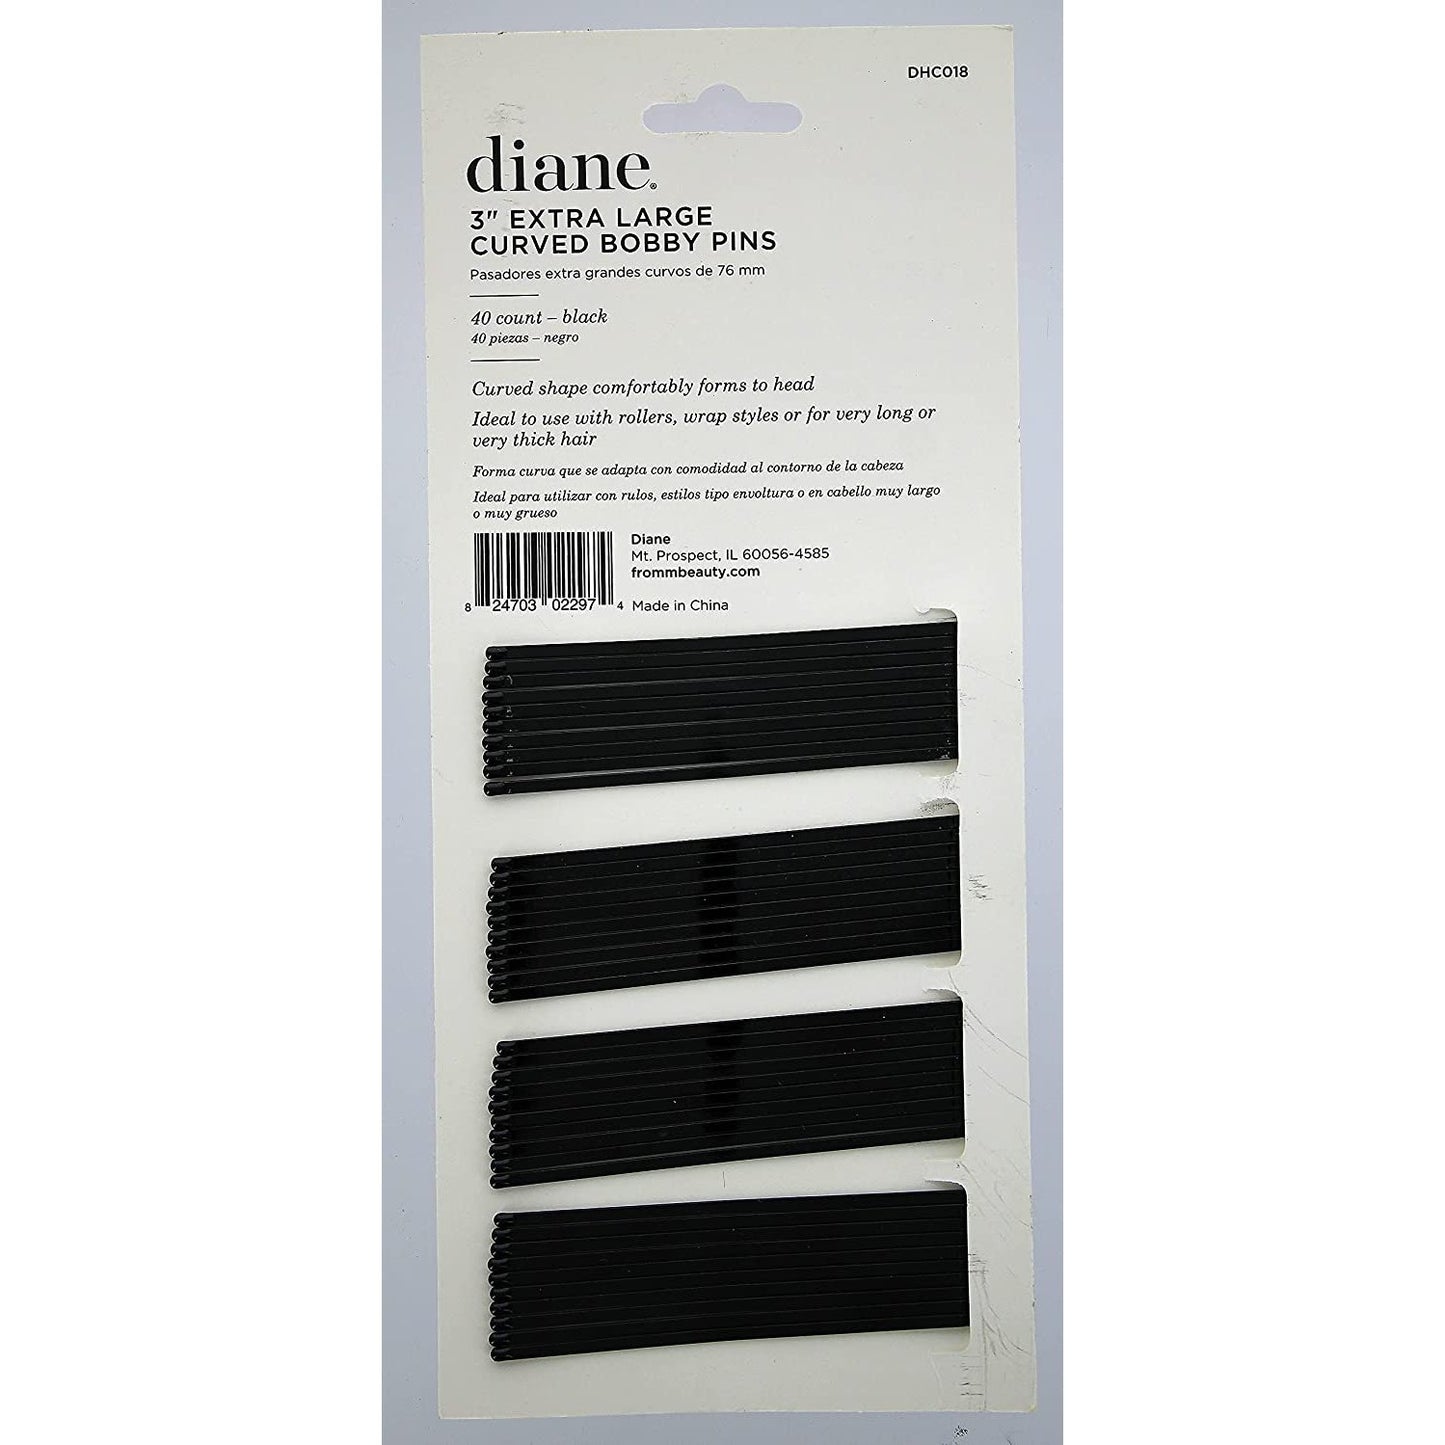 Diane 3in. Curved Jumbo Bobby Pins Black- 40 Count